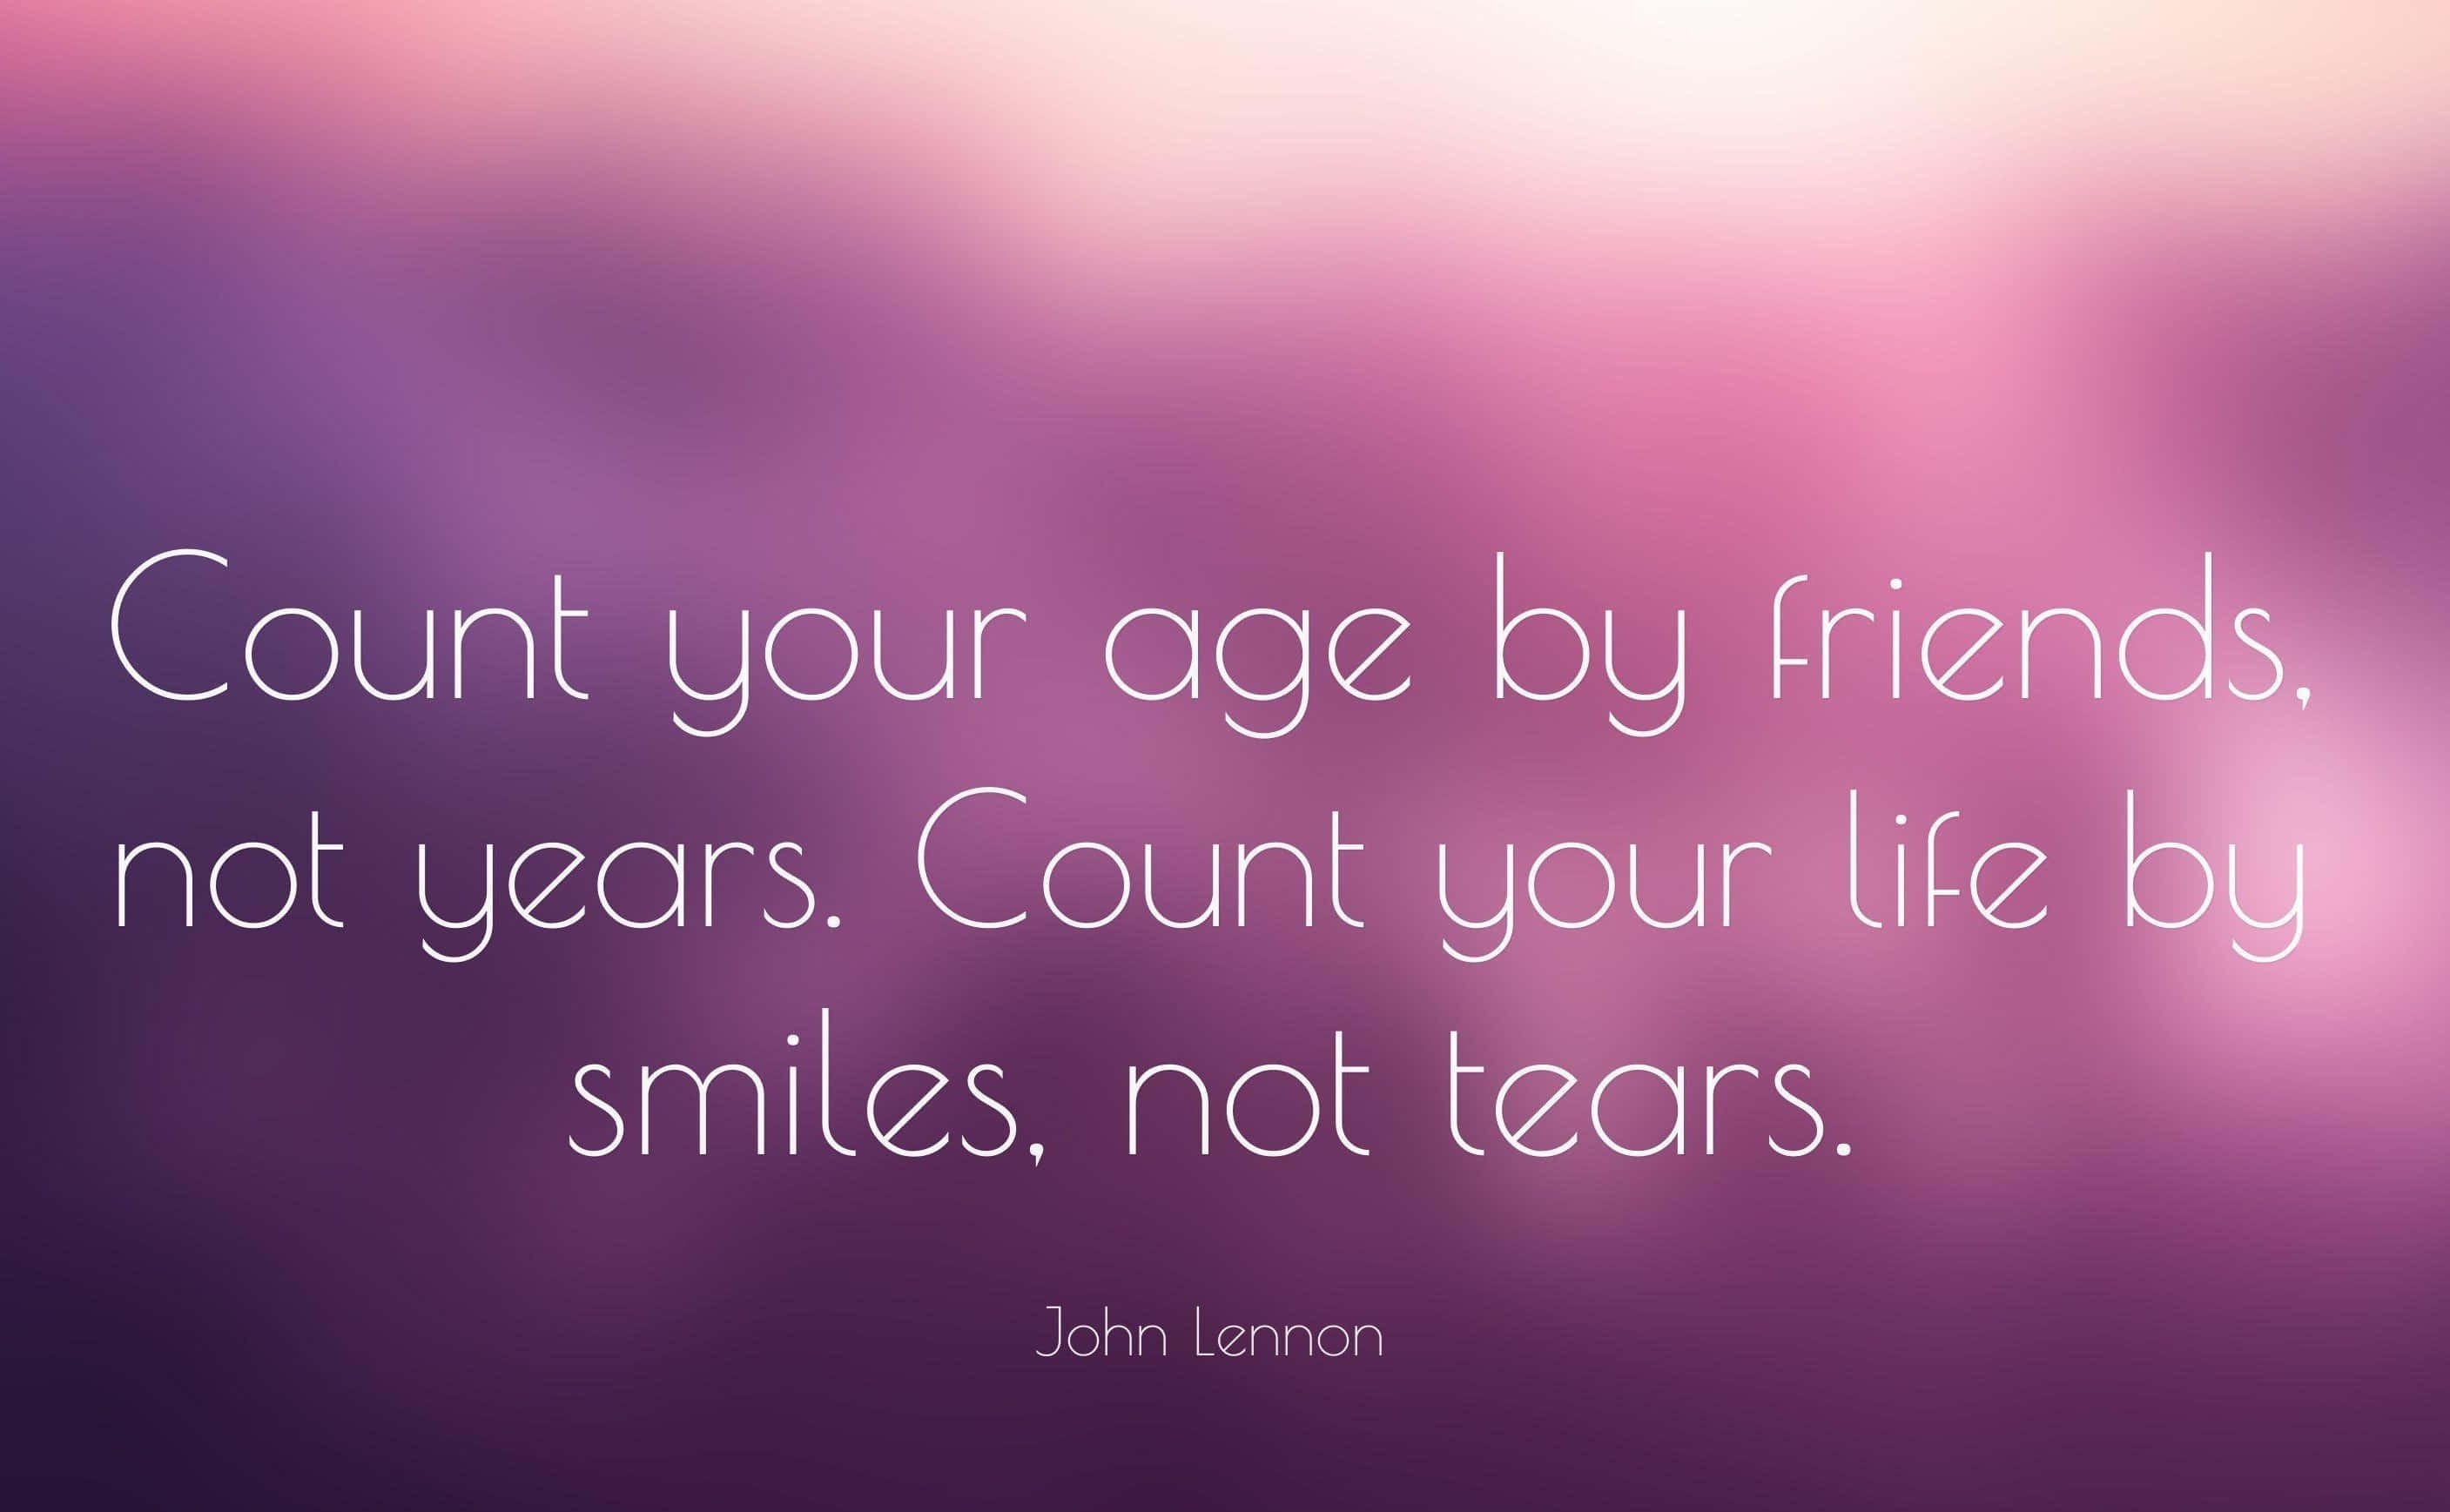 Count Your Age By Friends, Not Years Count Your Life By Smiles, Not Tears